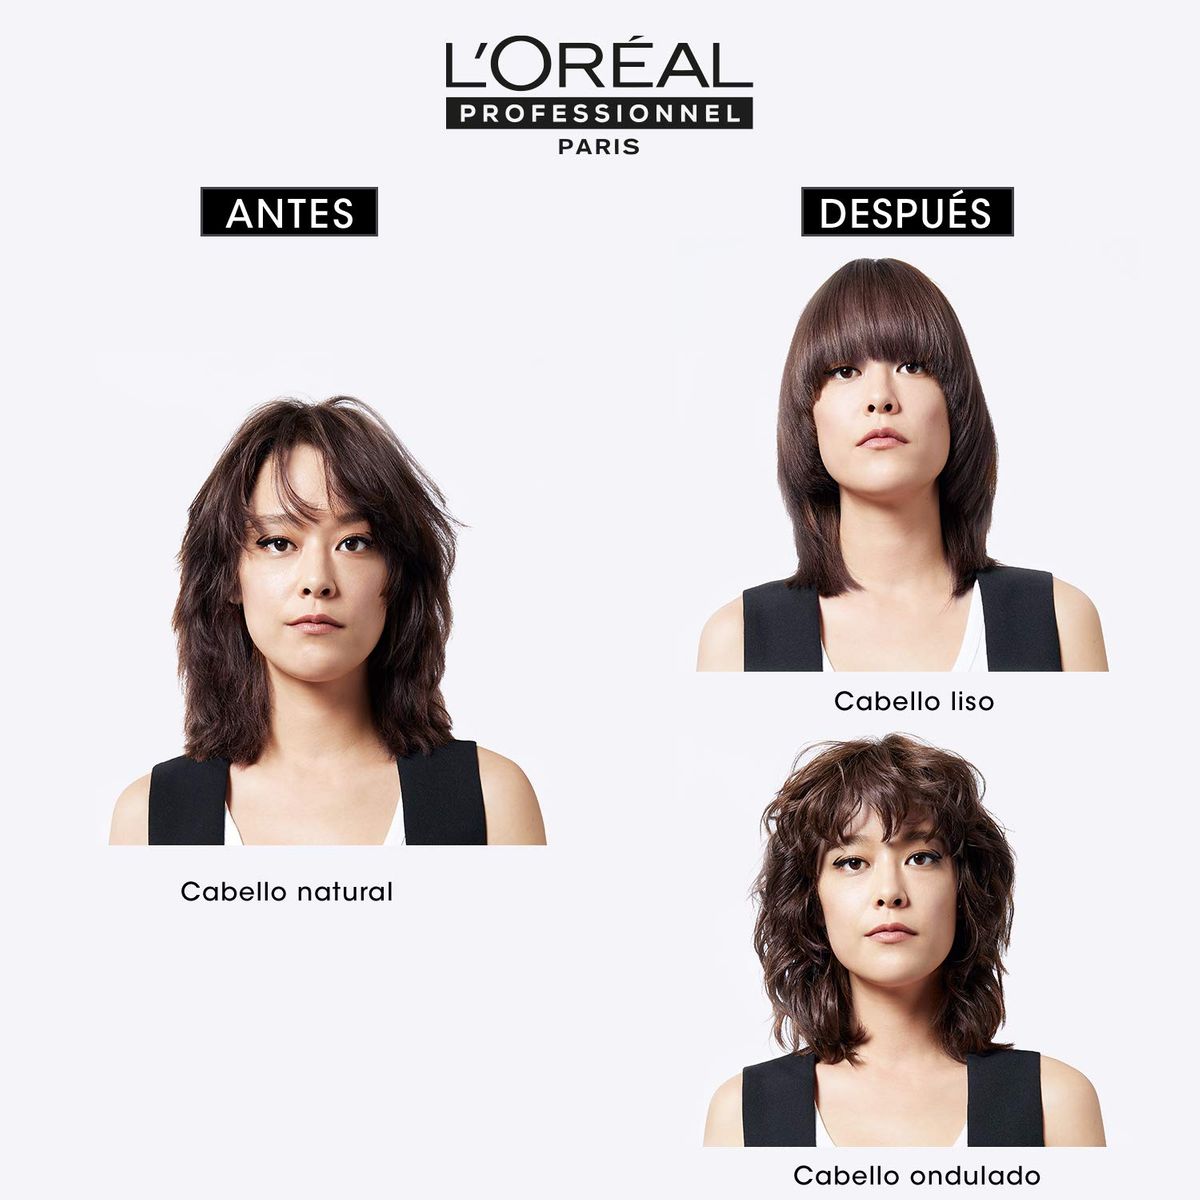 LOreal Professionnel Paris| SteamPod 3.0 Professional steam hair styler for natural waves or straight hair heat control SteamPod 3.0 Karl Lagerfeld